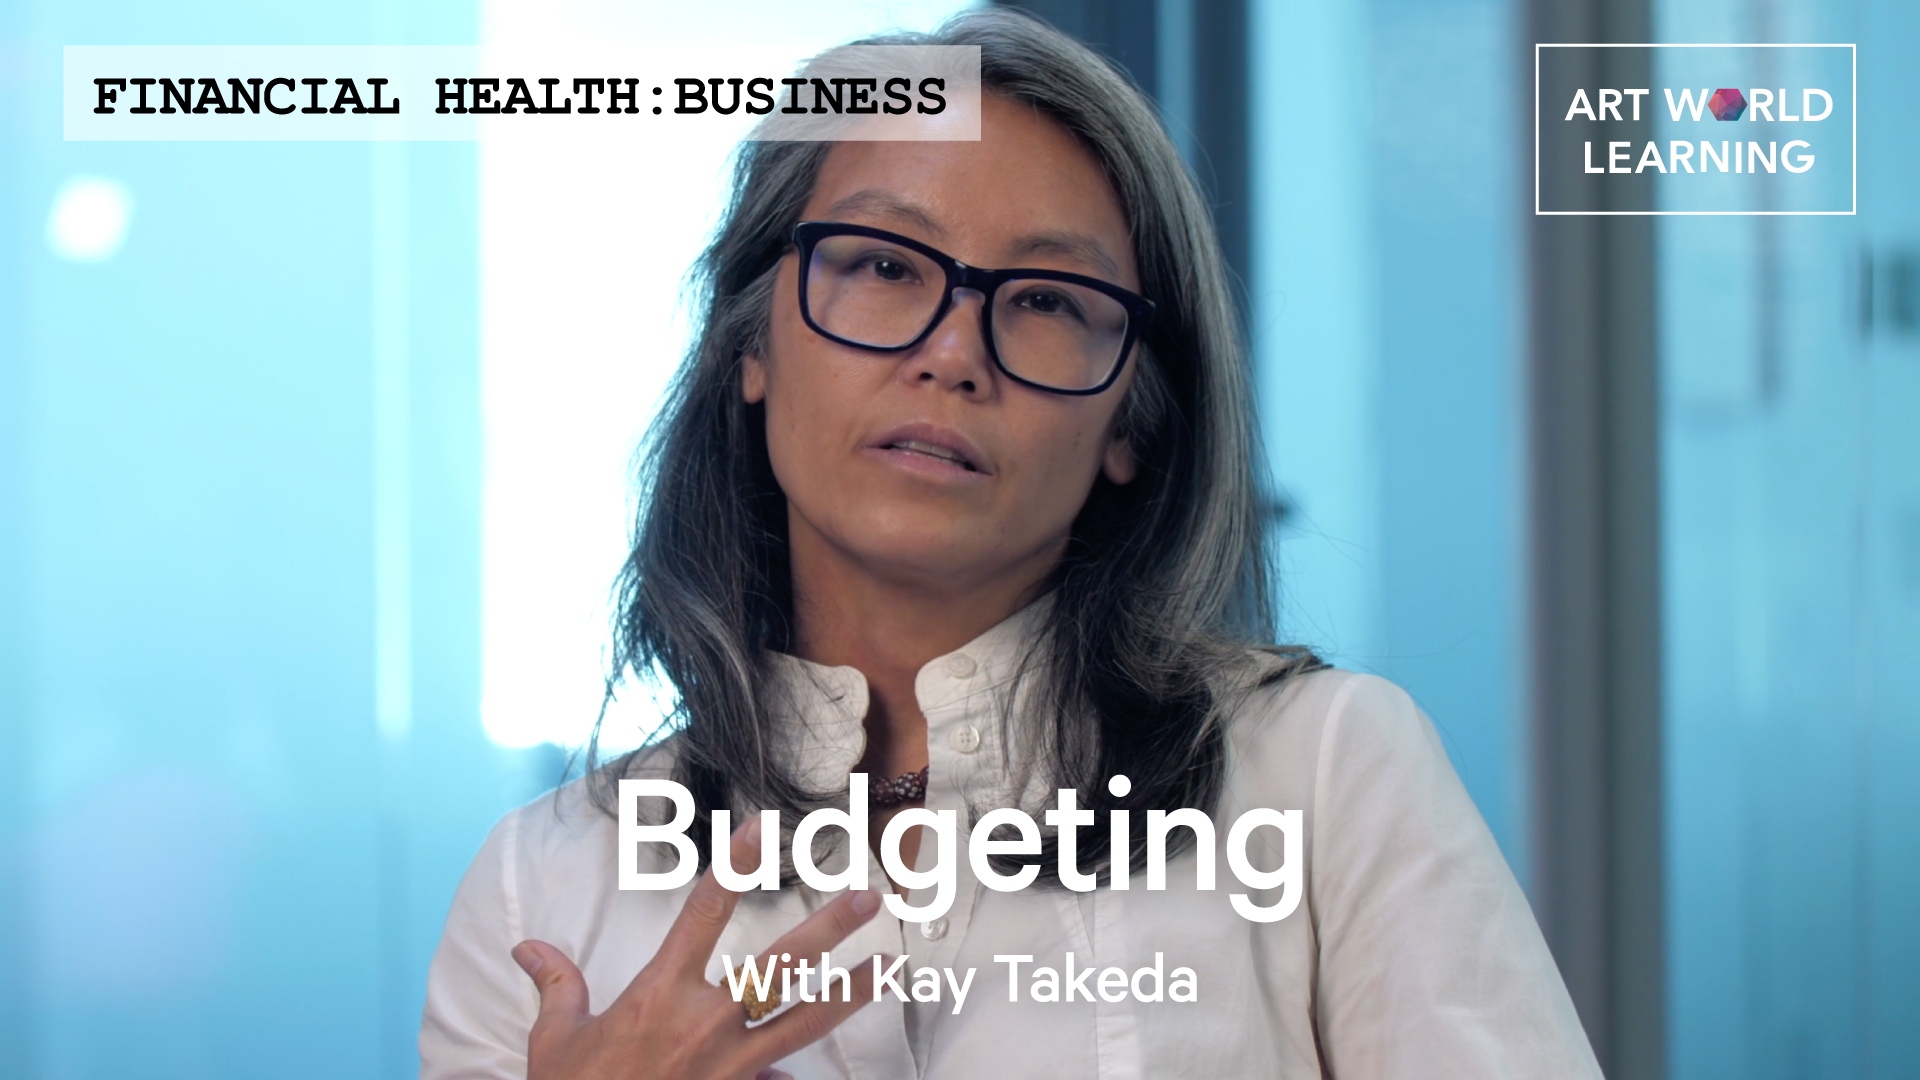 Says Financial Health: Business, Budgeting With Kay Takeda on top of a picture of Kay Takeda.